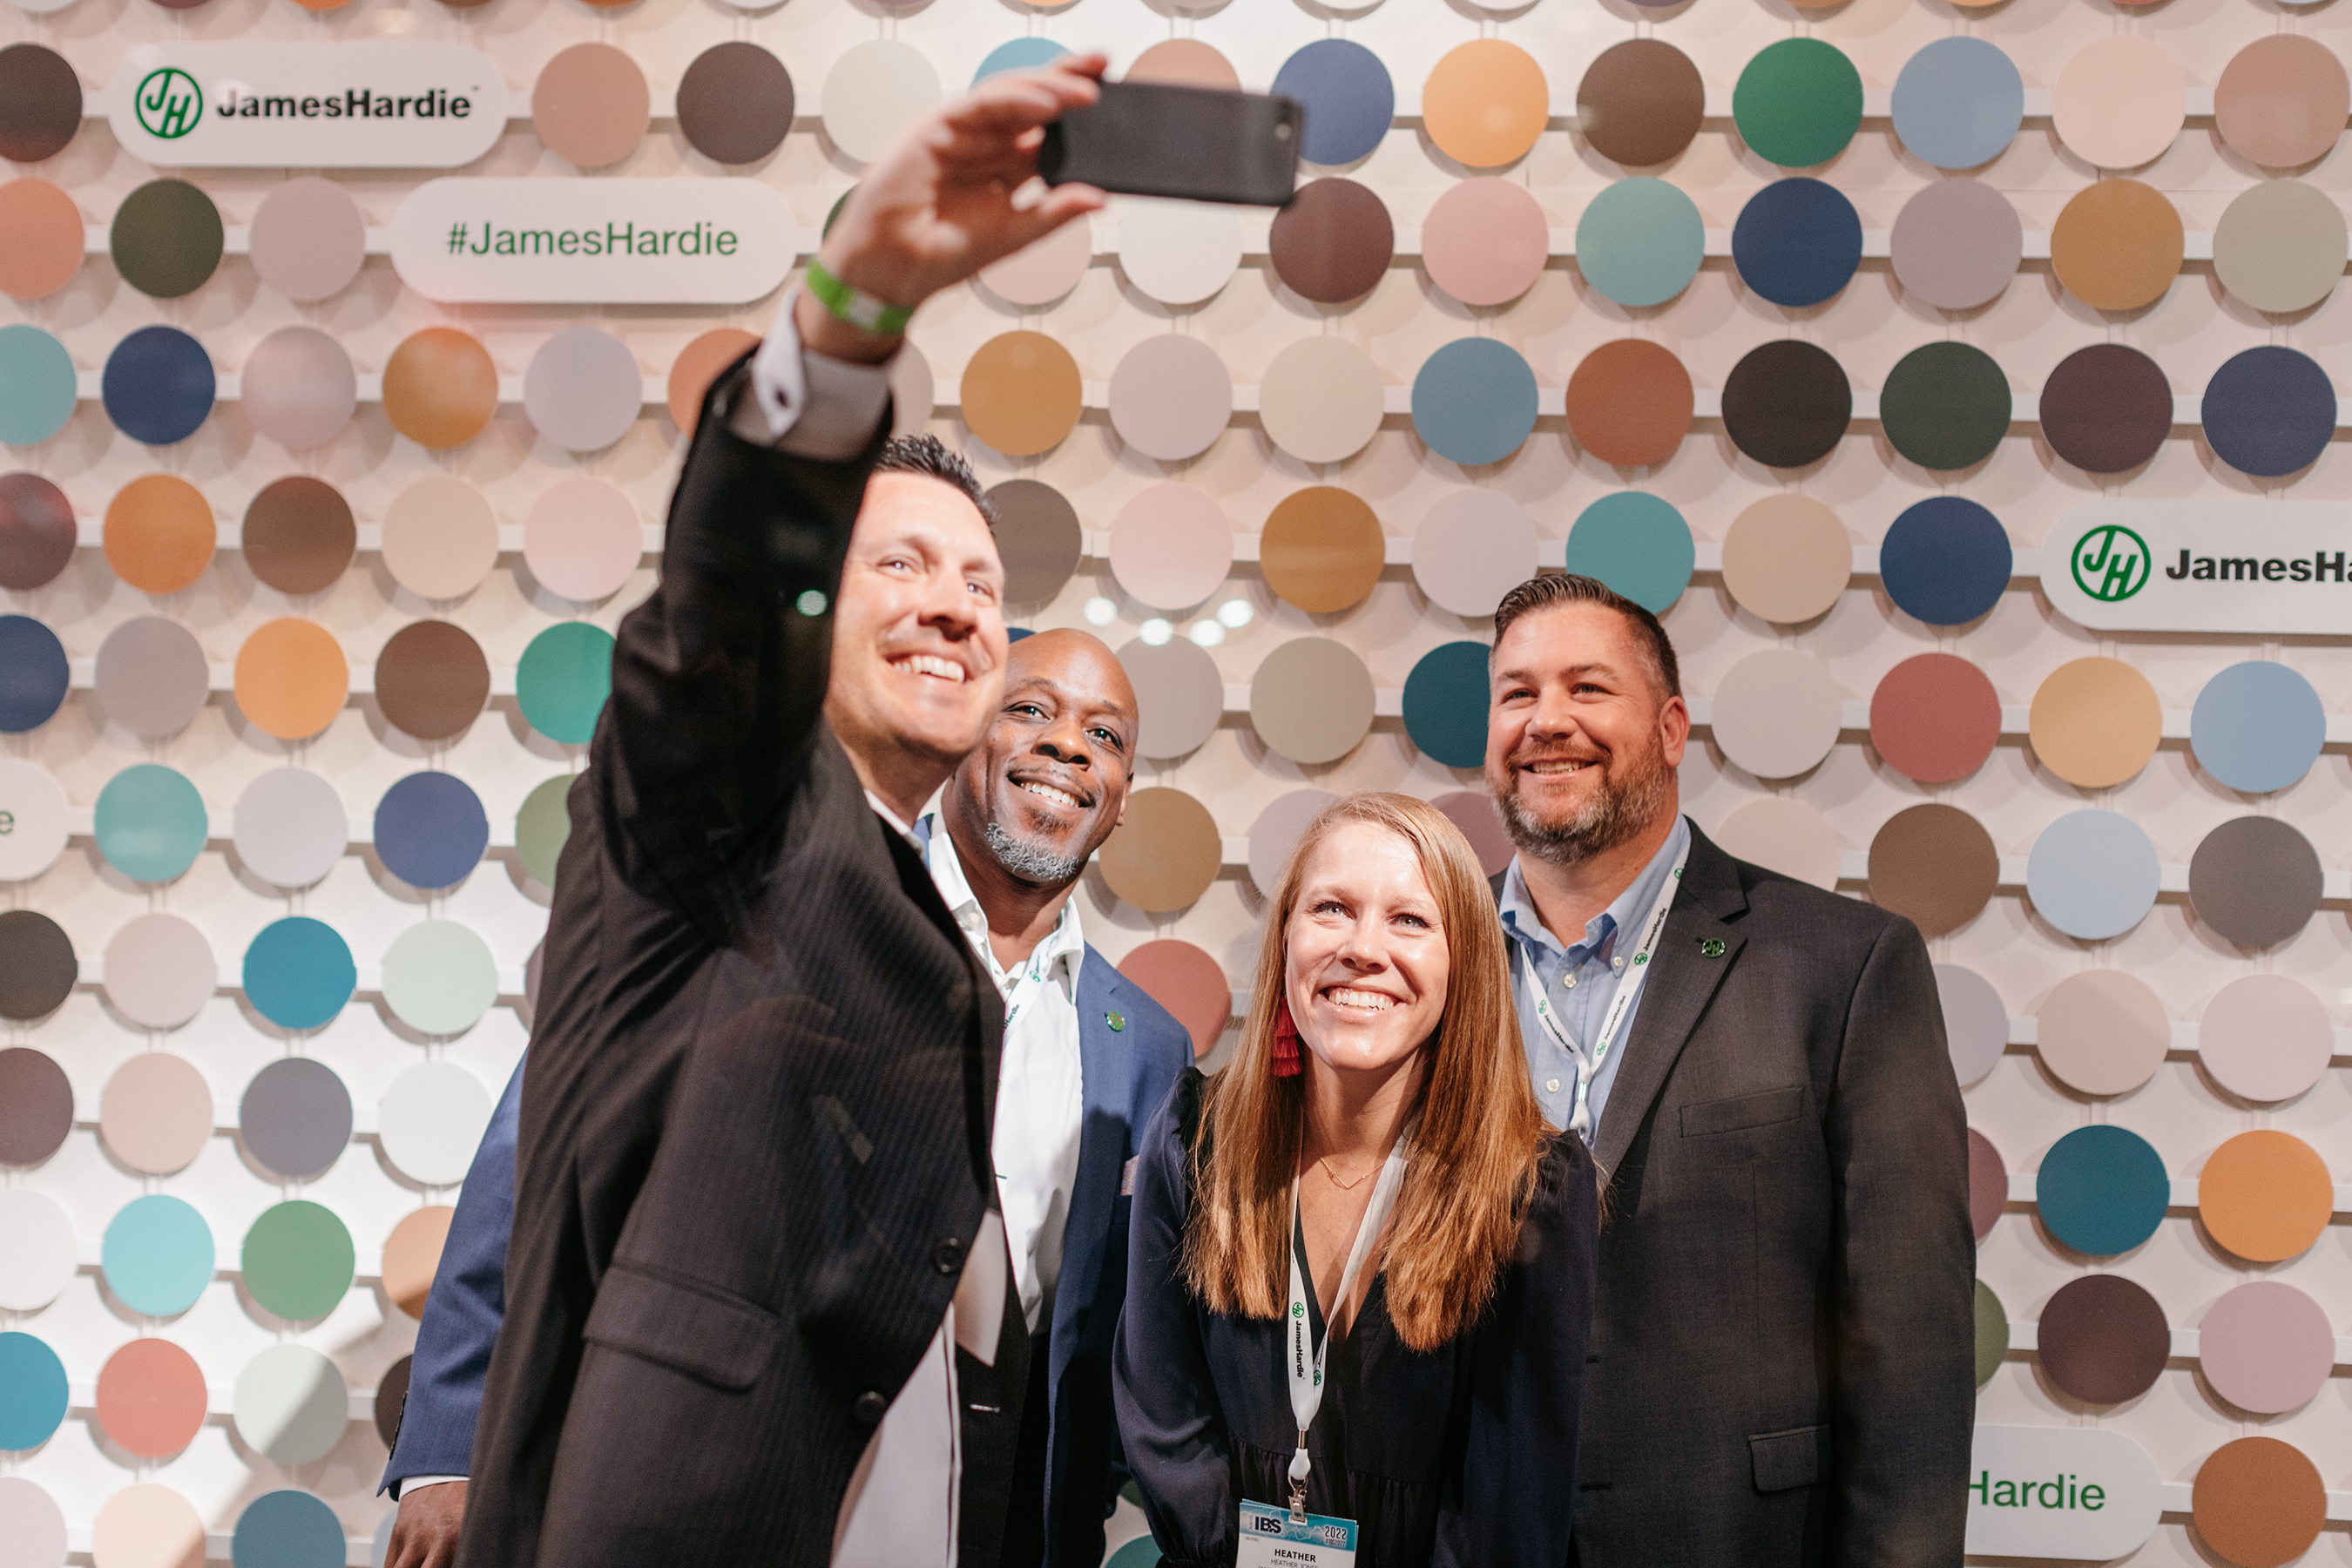 James Hardie employees take a photo in front of ColorPlus® Technology wall (from left to right: Greg King, Director, Sales Midwest; Preston Hills, Regional Account Manager; Heather Jones, Senior Manager, Retail Marketing; Hans Uslar, Distribution Demand Leader, Midwest).